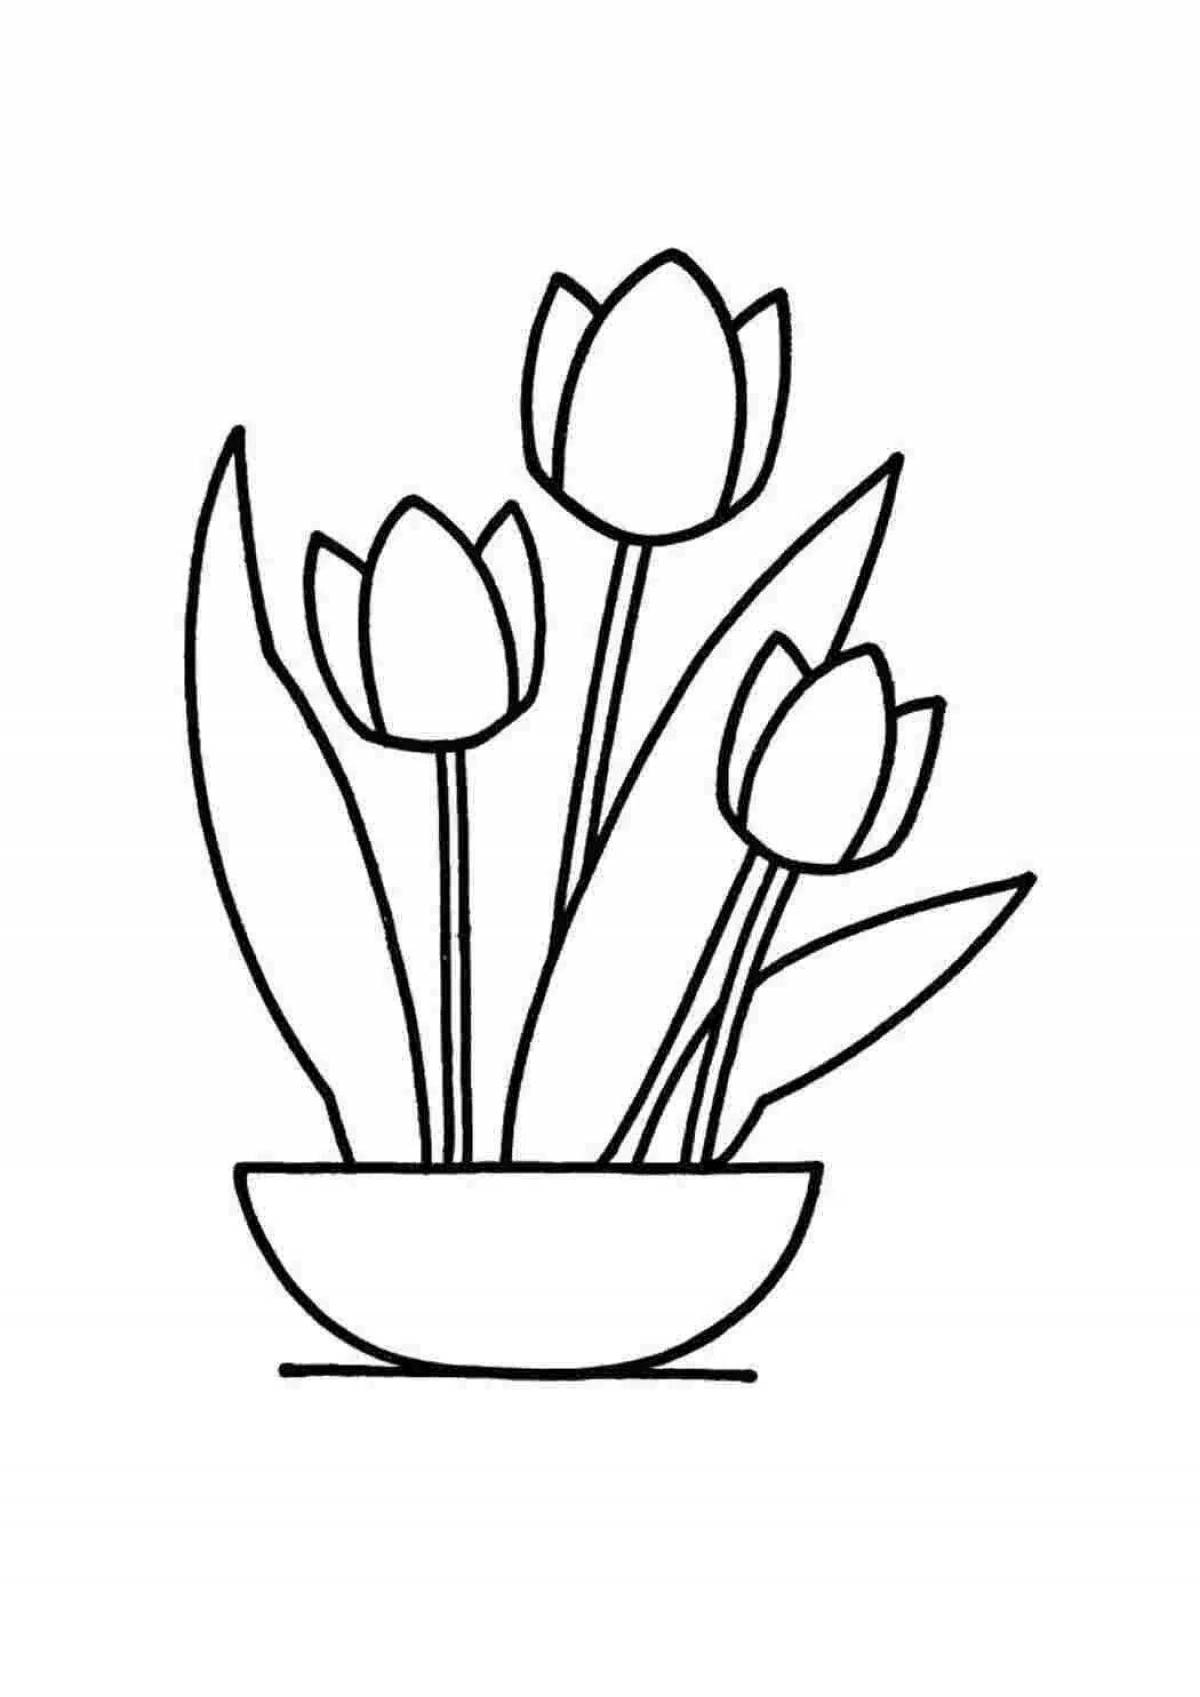 Colouring funny spring tulips